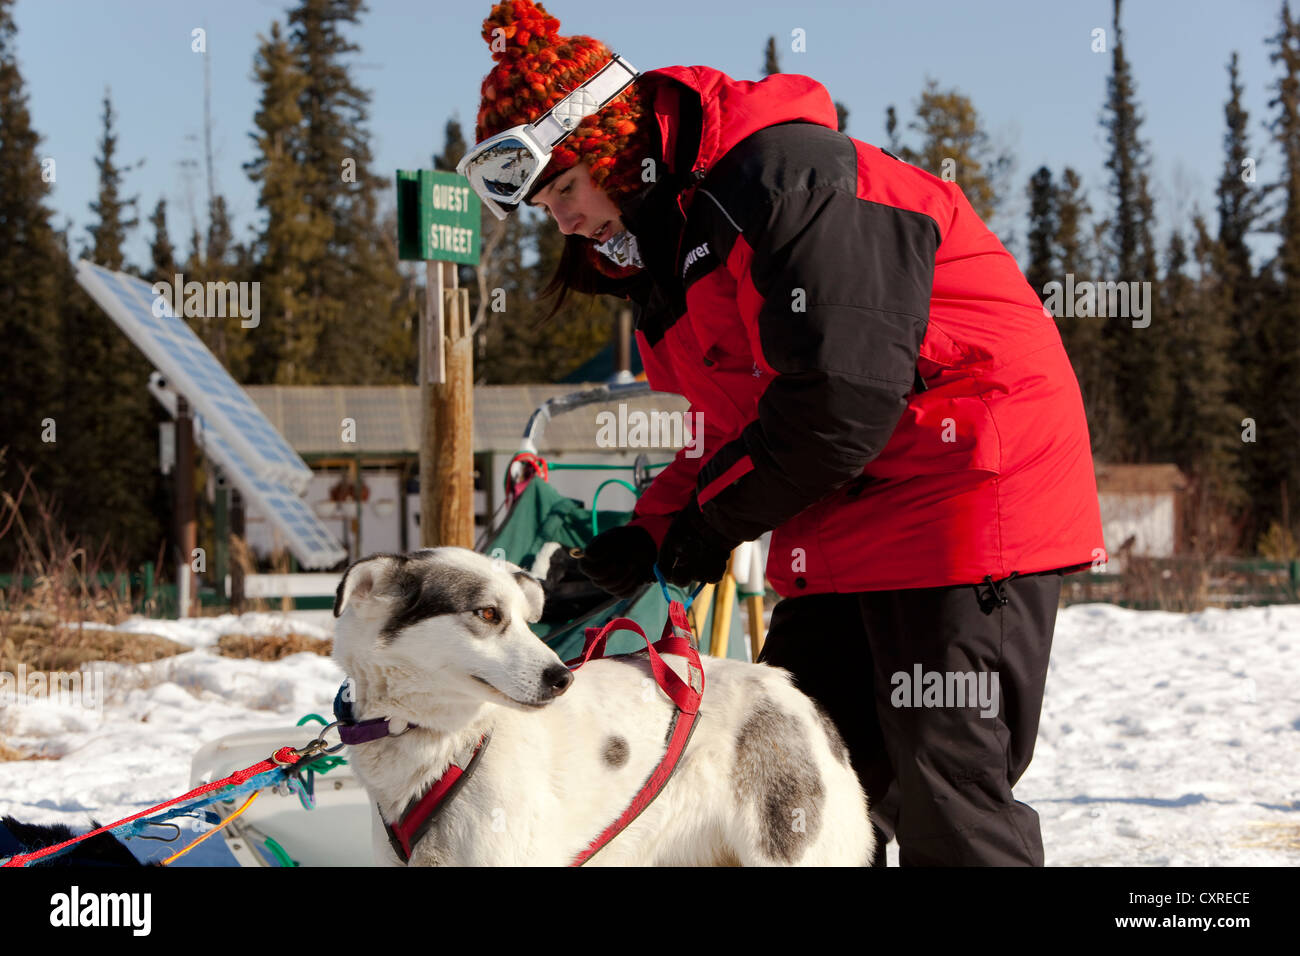 Young woman putting a harness on a sled dog, Alaskan Husky, harnessing, Yukon Territory, Canada Stock Photo